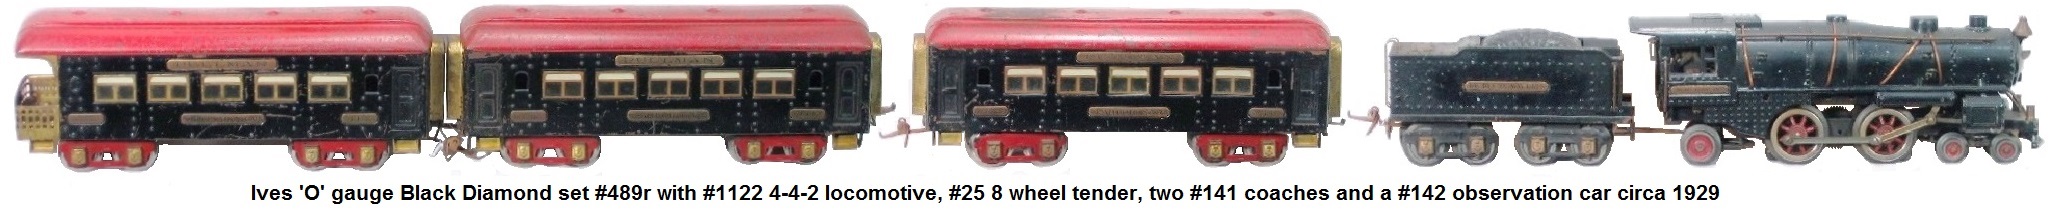 Ives 'O' gauge Black Diamond set #489r with #1122 4-4-2 steam outline locomotive, #25 tender, two #141 coaches and a #142 observation car circa 1929